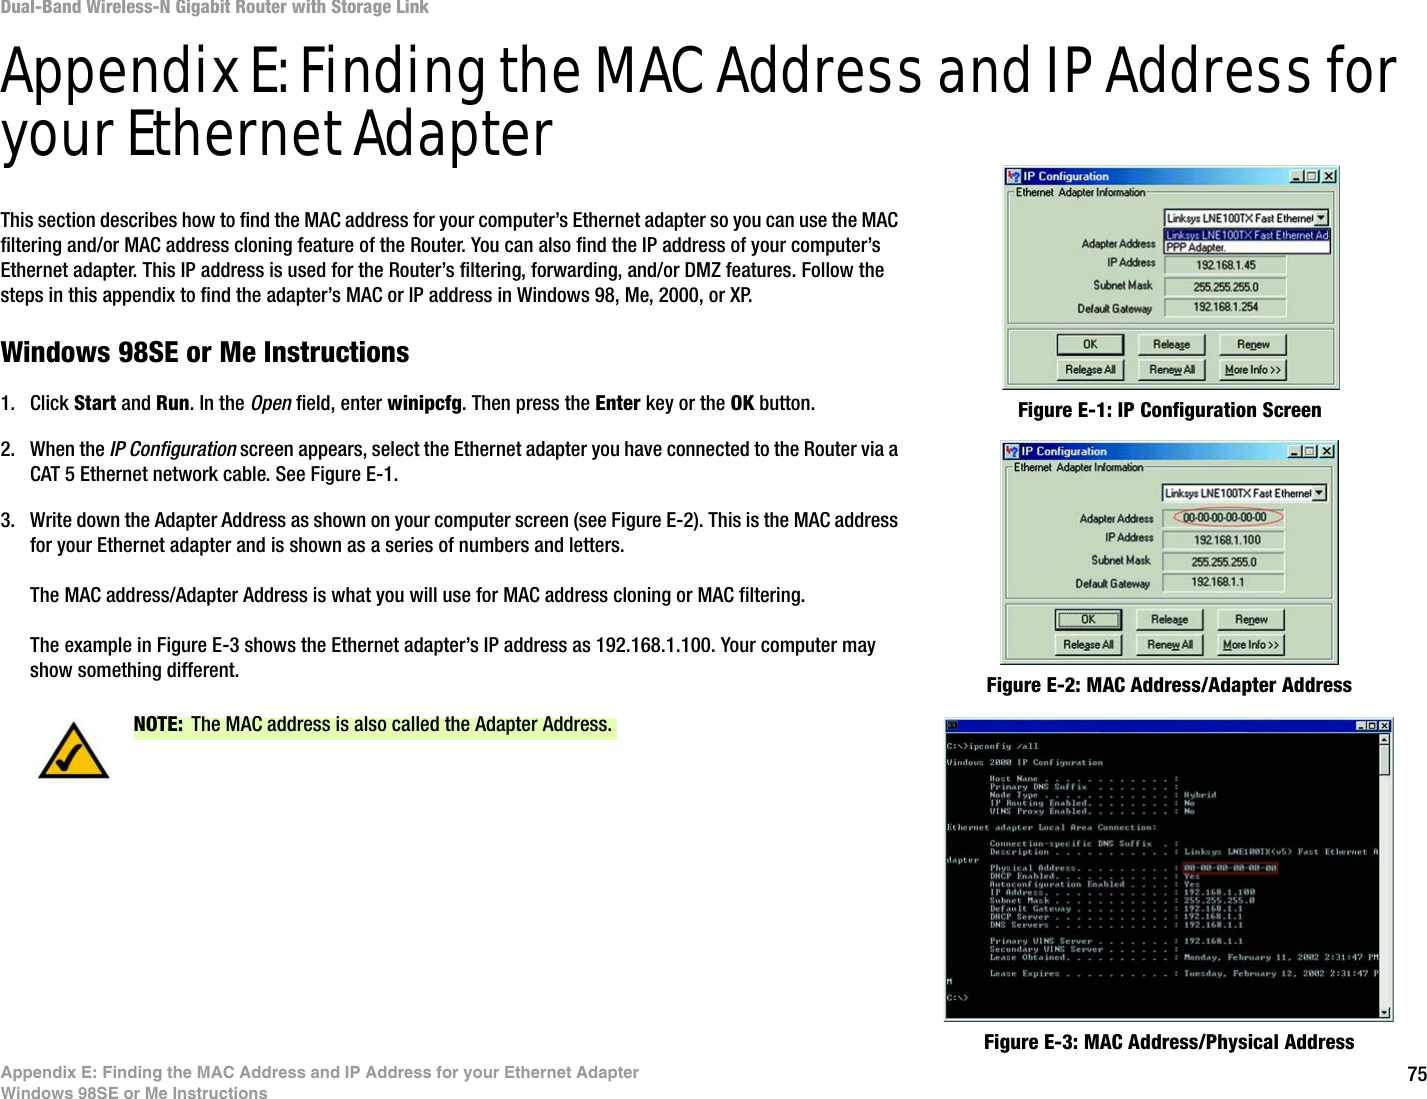 75Appendix E: Finding the MAC Address and IP Address for your Ethernet AdapterWindows 98SE or Me InstructionsDual-Band Wireless-N Gigabit Router with Storage LinkAppendix E: Finding the MAC Address and IP Address for your Ethernet AdapterThis section describes how to find the MAC address for your computer’s Ethernet adapter so you can use the MAC filtering and/or MAC address cloning feature of the Router. You can also find the IP address of your computer’s Ethernet adapter. This IP address is used for the Router’s filtering, forwarding, and/or DMZ features. Follow the steps in this appendix to find the adapter’s MAC or IP address in Windows 98, Me, 2000, or XP.Windows 98SE or Me Instructions1. Click Start and Run. In the Open field, enter winipcfg. Then press the Enter key or the OK button. 2. When the IP Configuration screen appears, select the Ethernet adapter you have connected to the Router via a CAT 5 Ethernet network cable. See Figure E-1.3. Write down the Adapter Address as shown on your computer screen (see Figure E-2). This is the MAC address for your Ethernet adapter and is shown as a series of numbers and letters.The MAC address/Adapter Address is what you will use for MAC address cloning or MAC filtering.The example in Figure E-3 shows the Ethernet adapter’s IP address as 192.168.1.100. Your computer may show something different. Figure E-2: MAC Address/Adapter AddressFigure E-1: IP Configuration ScreenNOTE: The MAC address is also called the Adapter Address.Figure E-3: MAC Address/Physical Address